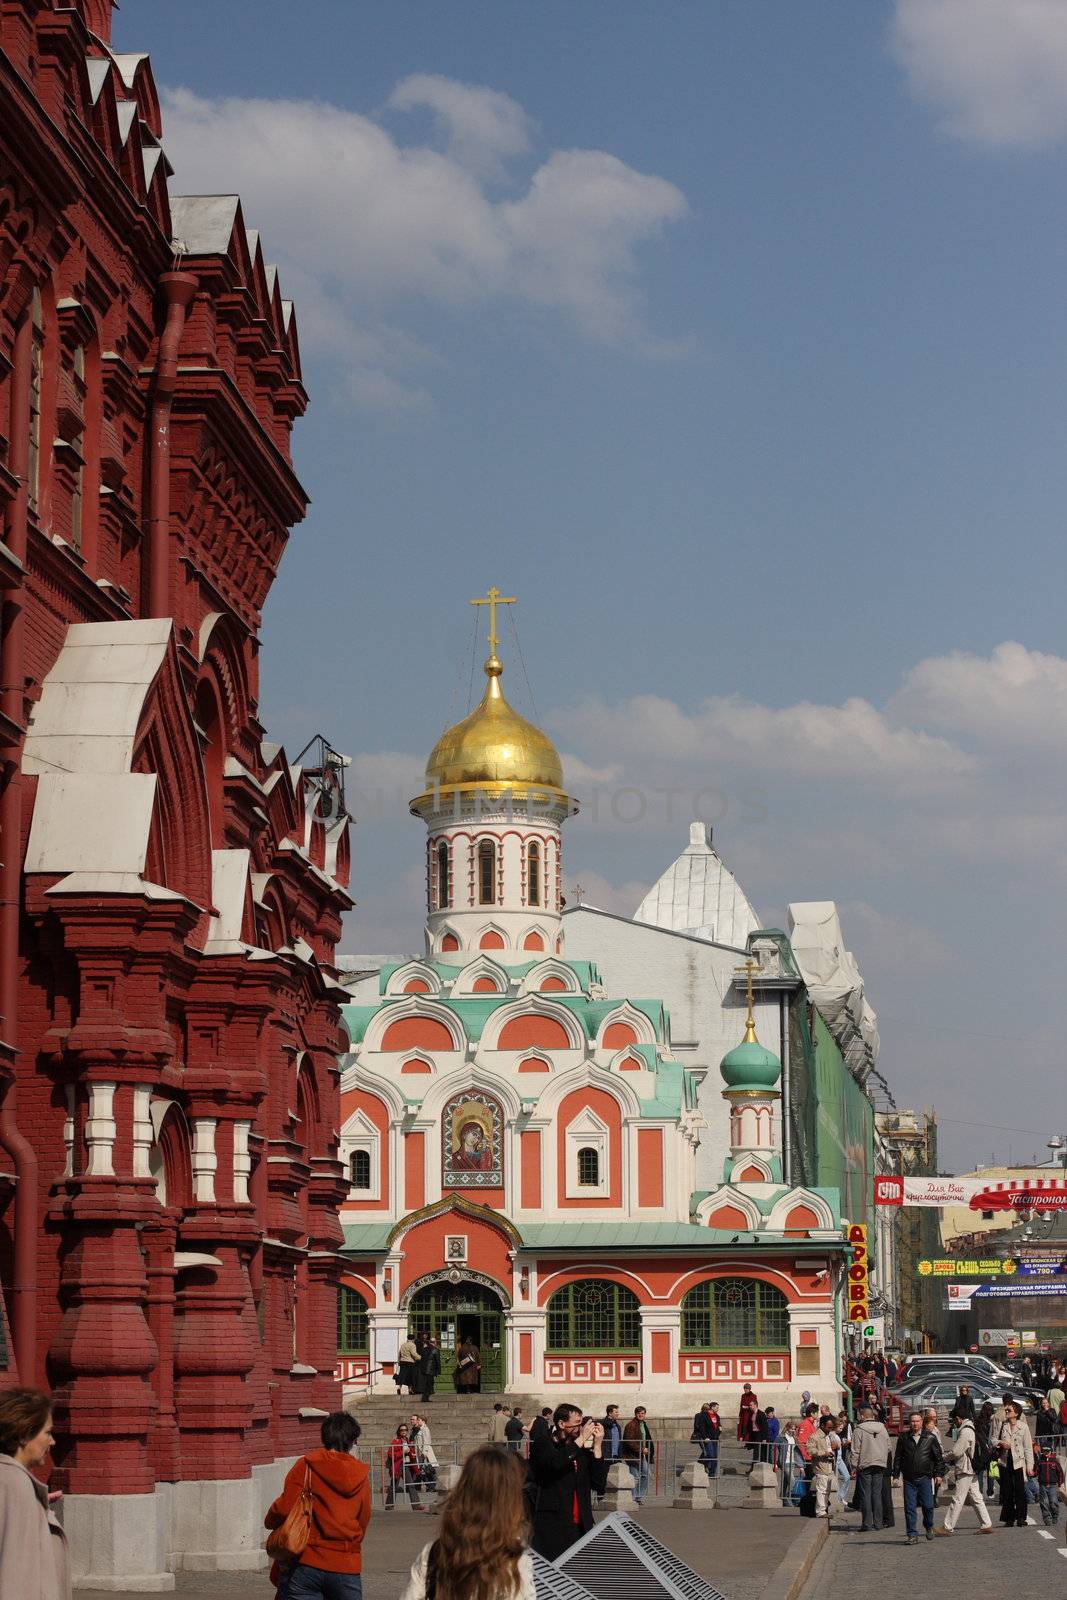 Church, Kazan, divine, mothers, red, the area, historical, a museum, domes, a building, people, walk, day, a city, a brick, red, gold, a cross, Orthodoxy